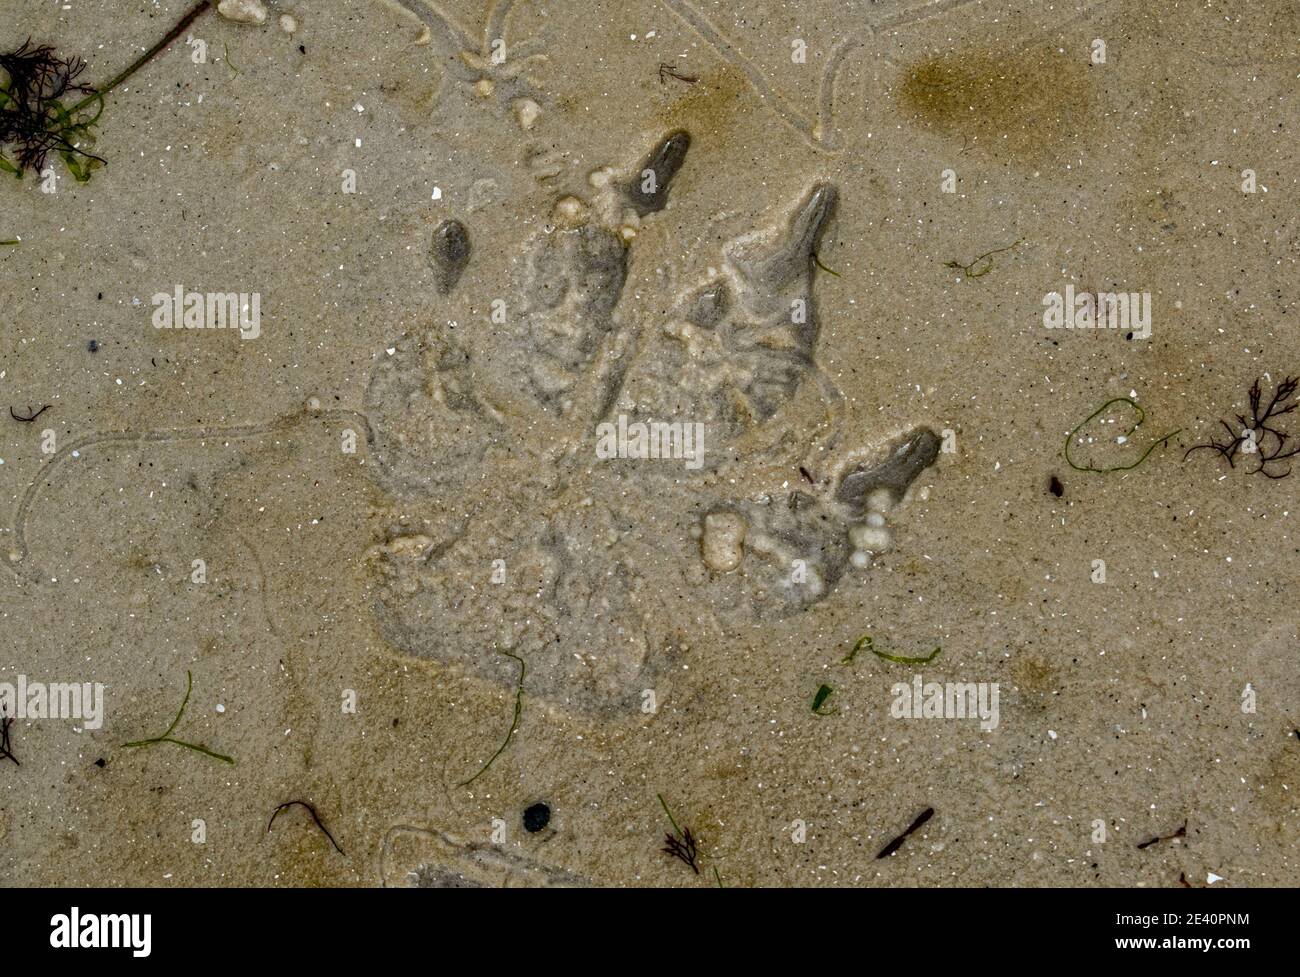 Dog paw print in the sand Stock Photo